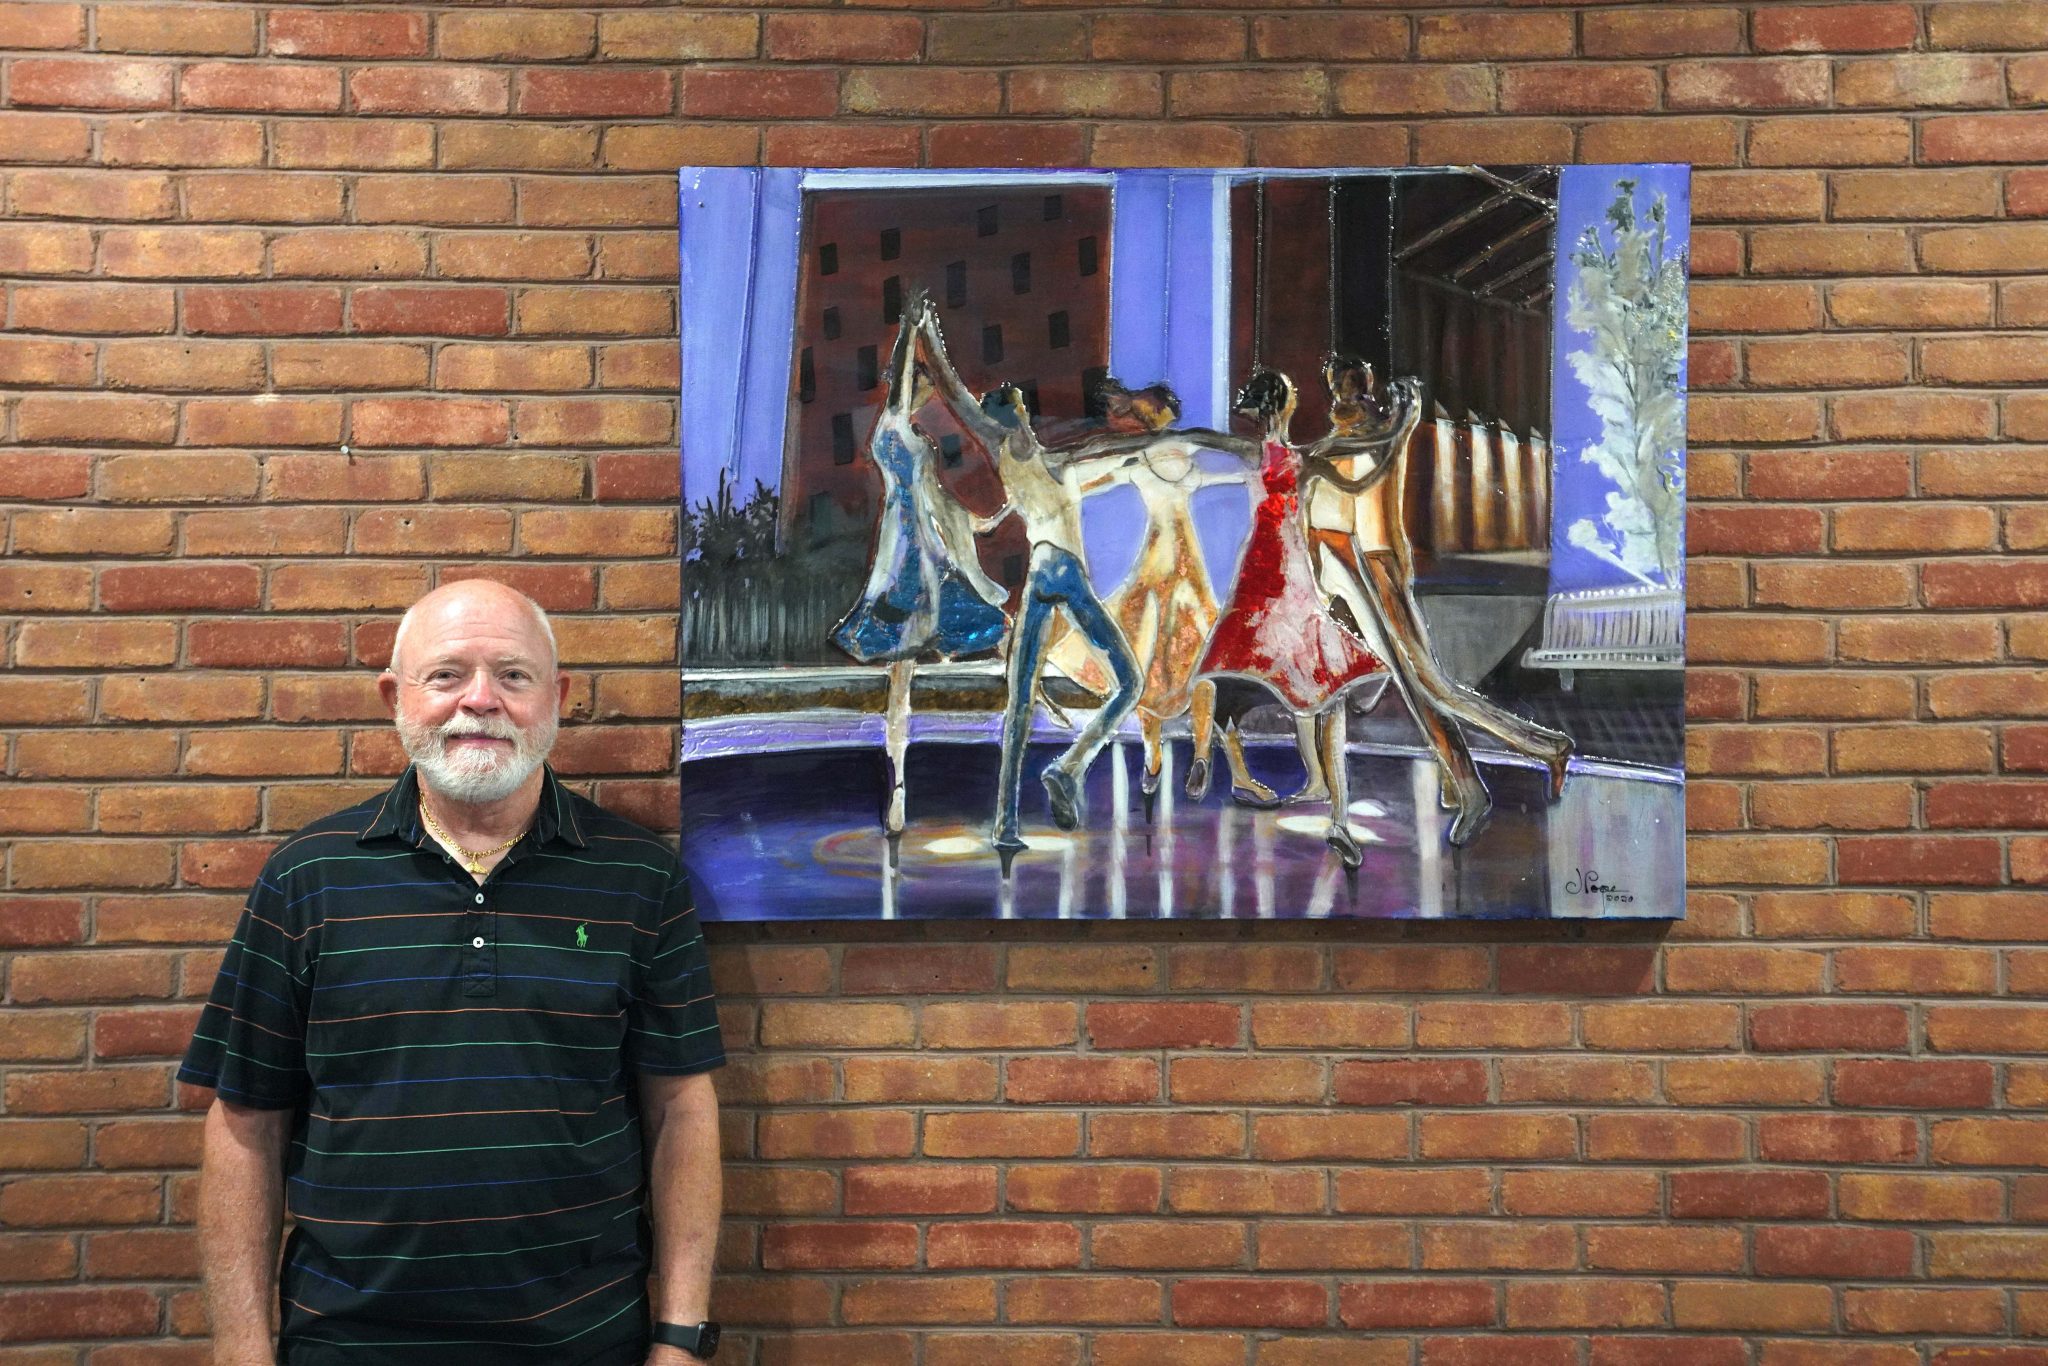 Johnny Pope of Shalimar donated this mixed media artwork to the Mattie Kelly Arts Center in March of 2021.